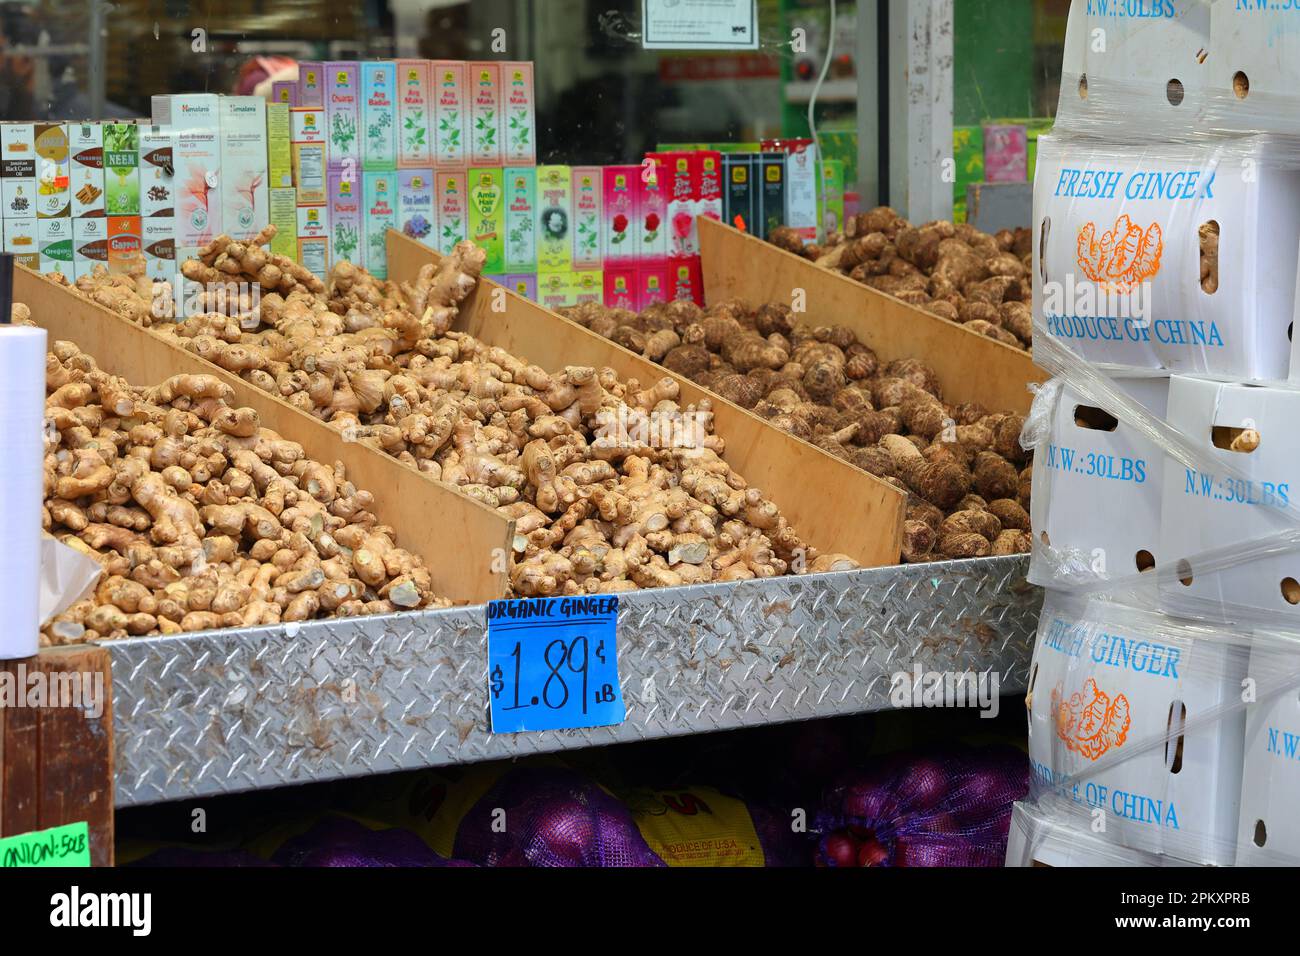 Fresh Ginger (Zingiber officinale) labeled 'organic' but with no certification, at a South Asian Indo Pak market in Jackson Heights, New York. Stock Photo